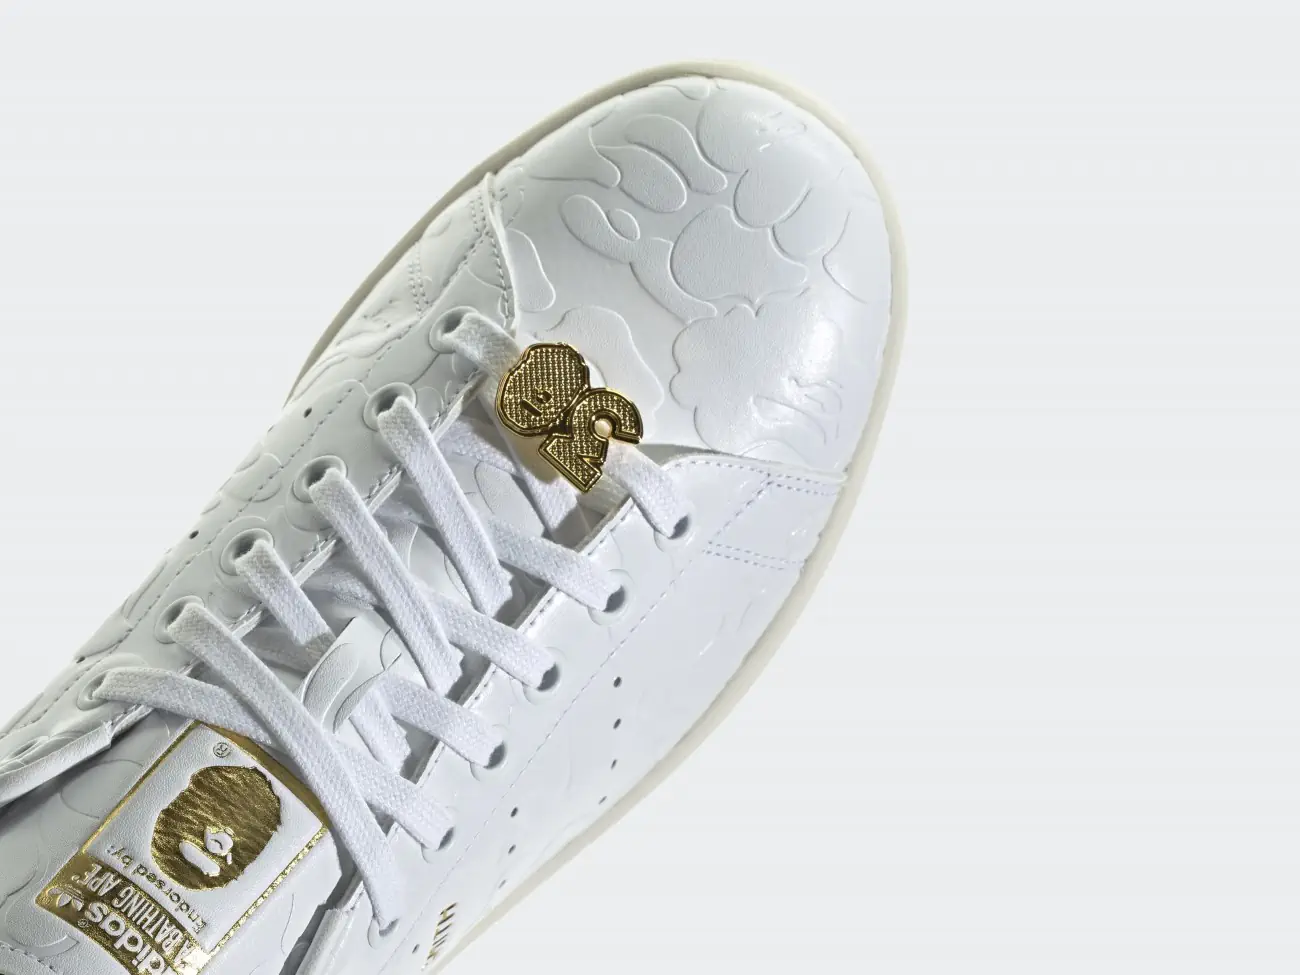 adidas Originals and BAPE® collaborate on Stan Smith for BAPE®'s 30th anniversary